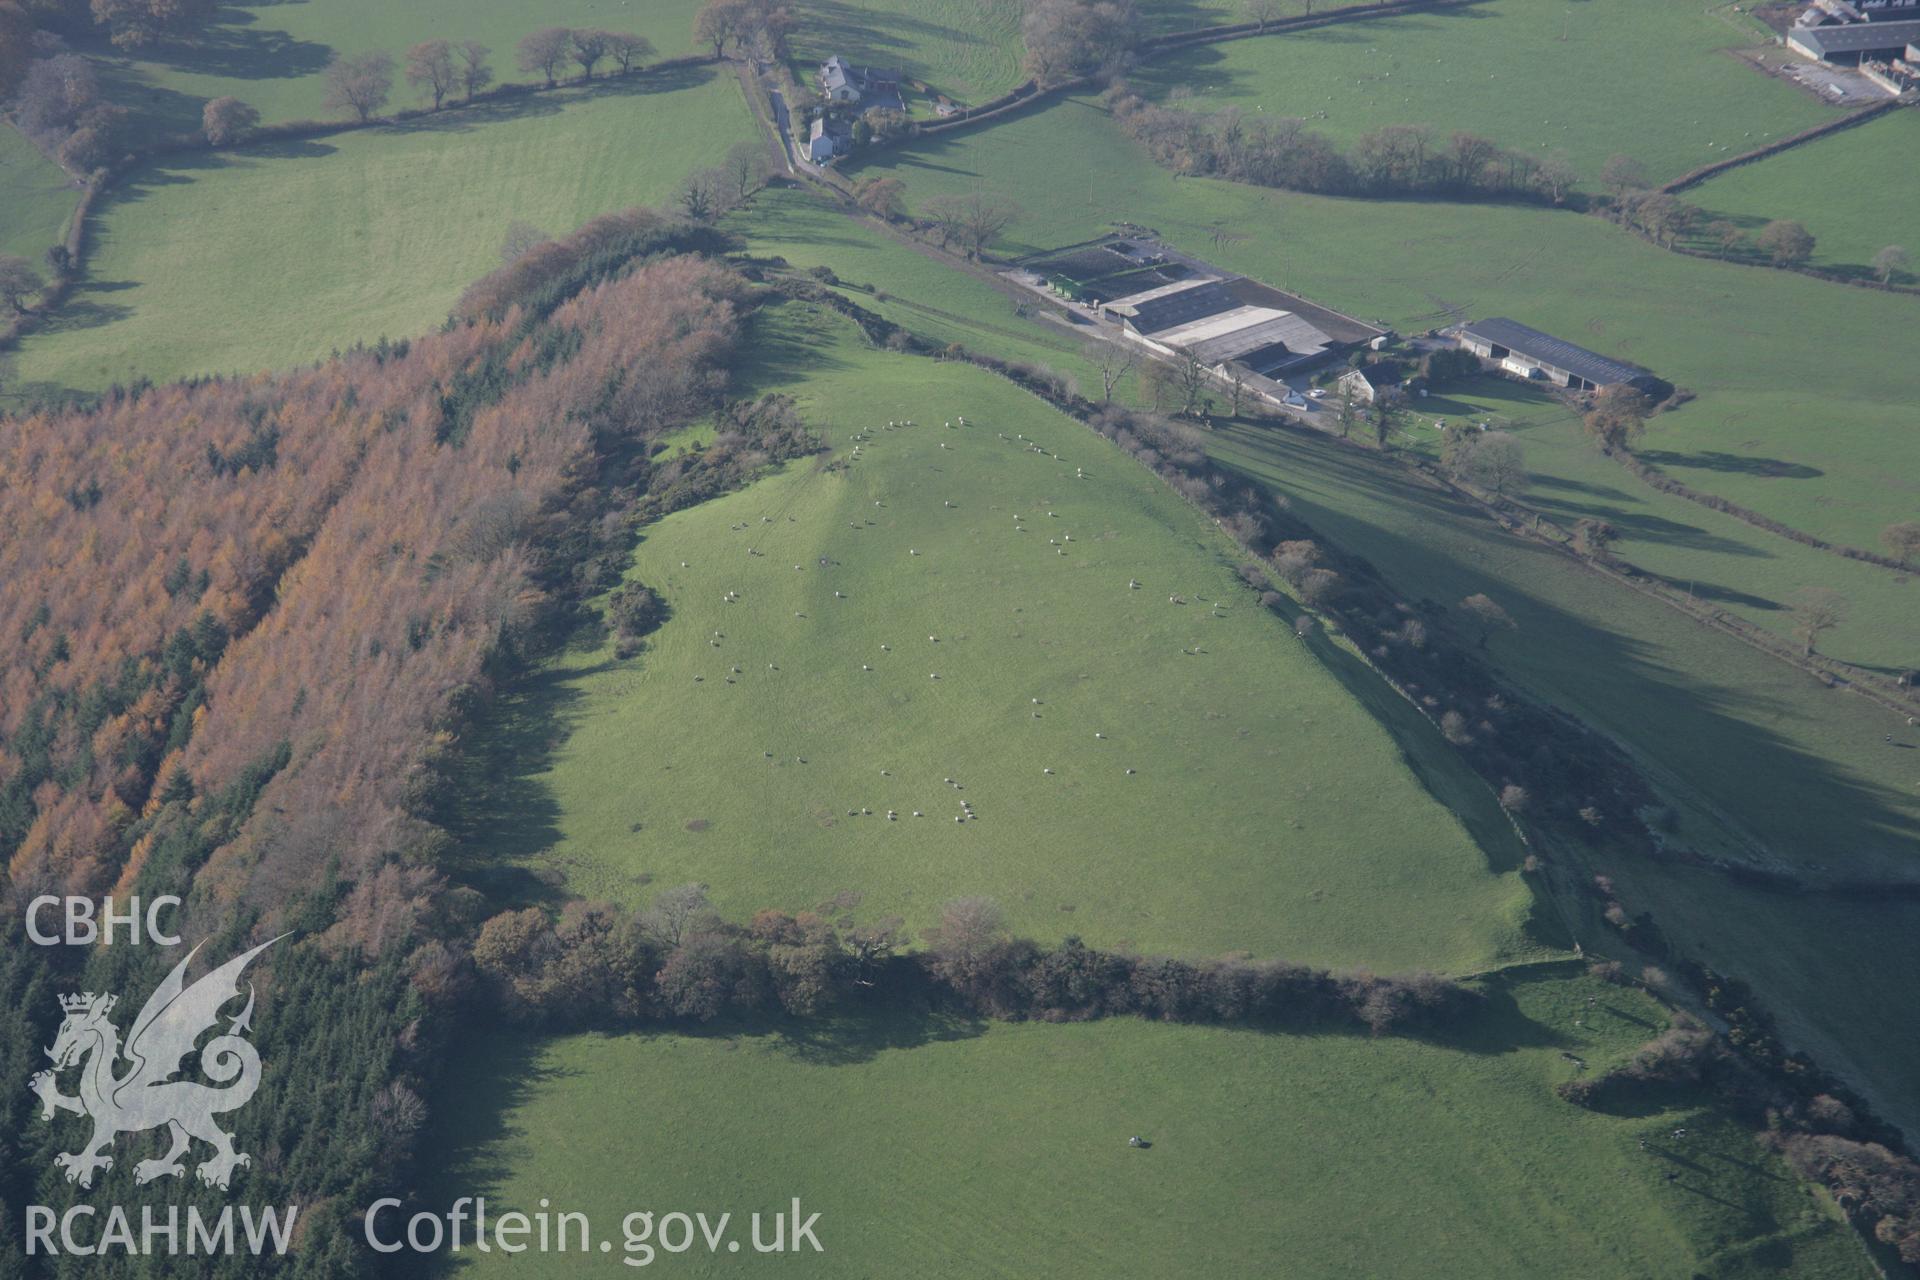 RCAHMW colour oblique photograph of Merlin's Hill, hillfort, view from east. Taken by Toby Driver on 17/11/2005.